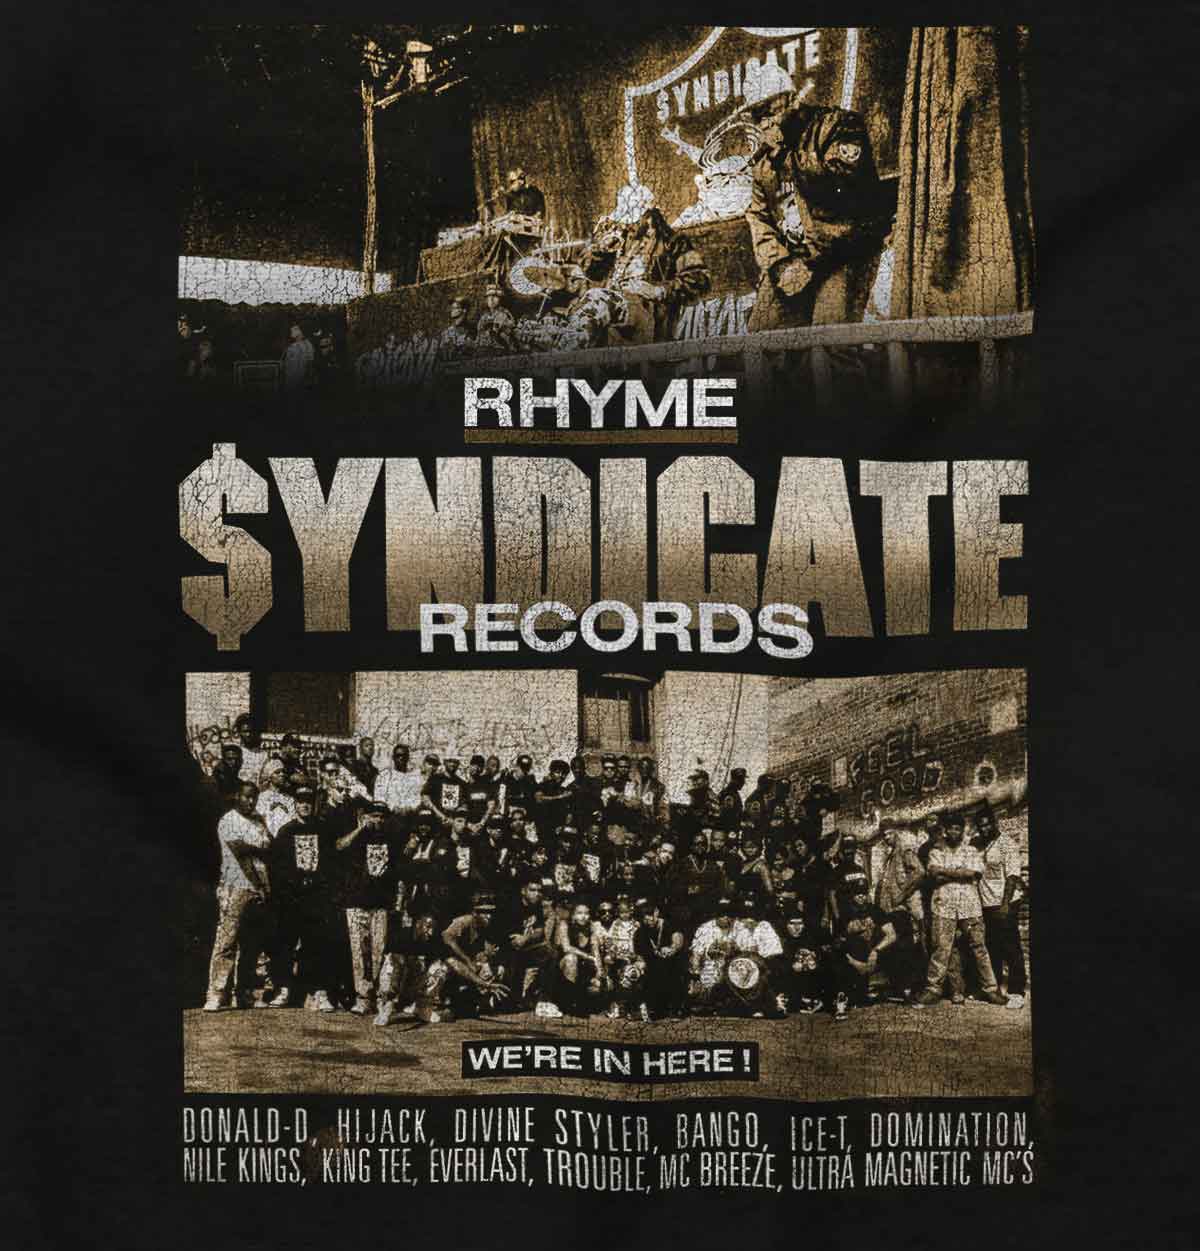 This image portrays the Rhyme Syndicate members, who are pioneers in hip-hop, standing together in a poster. It represents unity and brotherhood in the music industry. It's a nostalgic reminder of the golden days of the game.